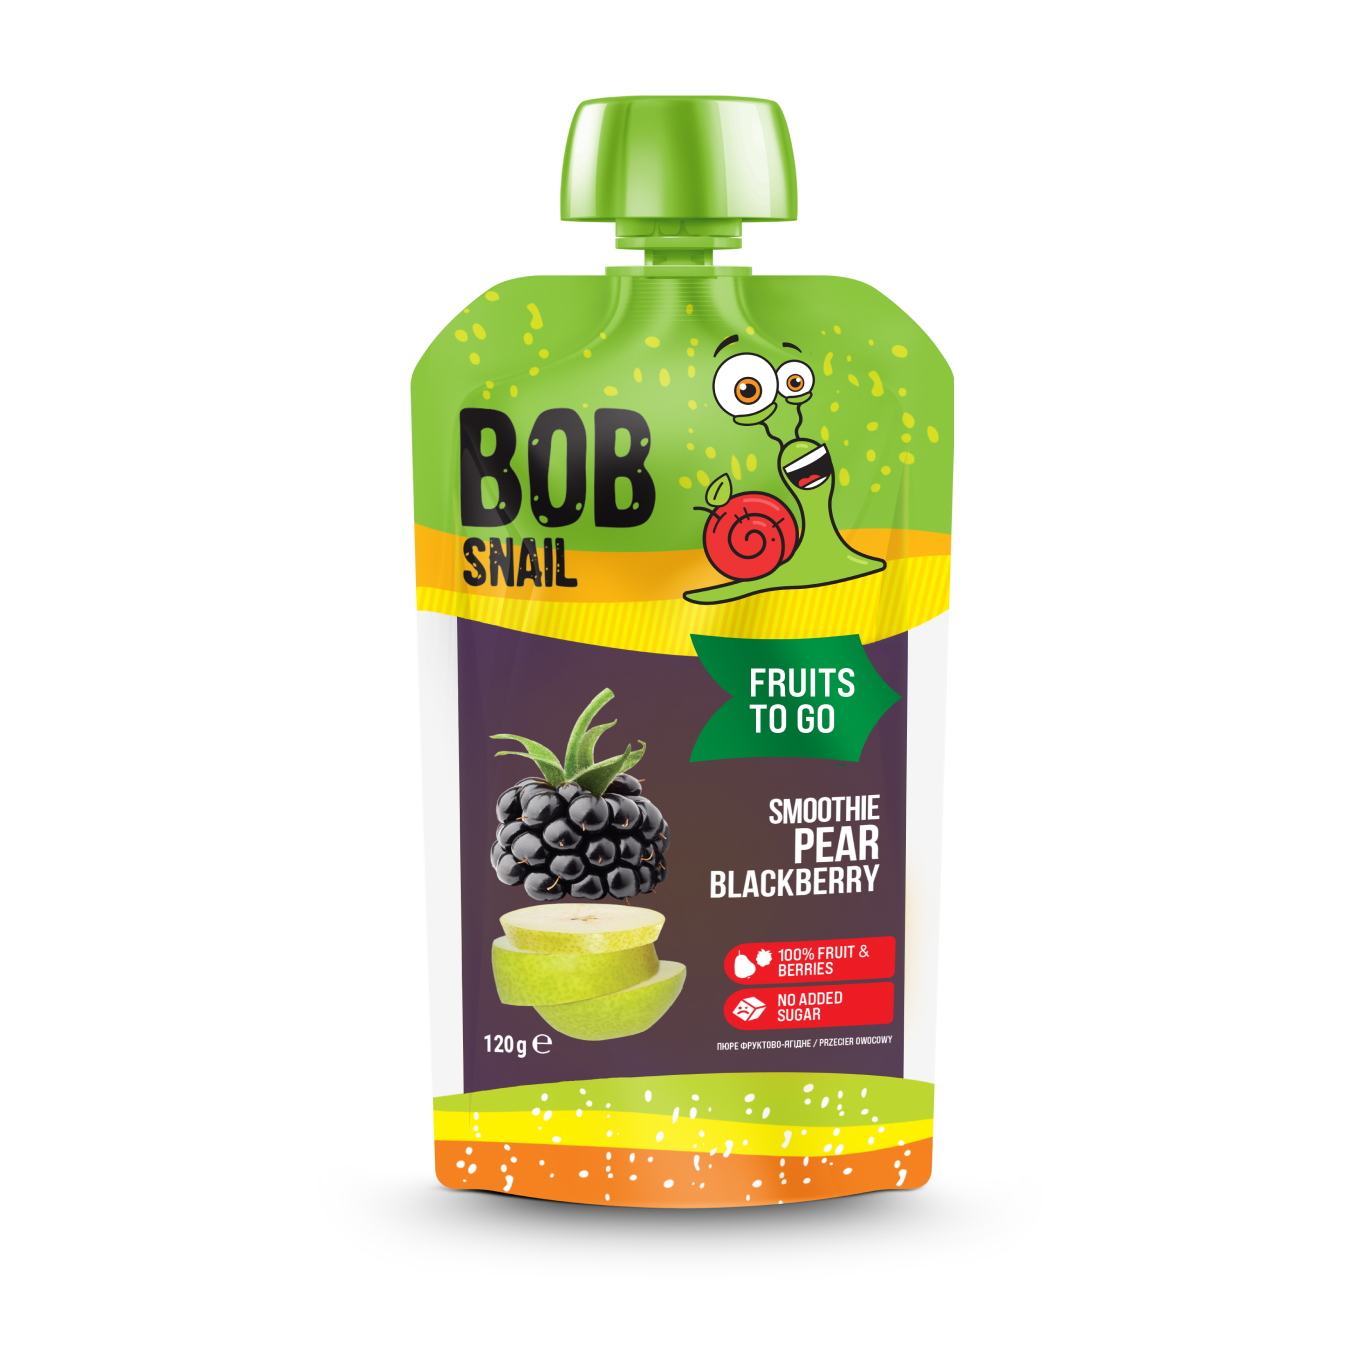 Bob Snail fruit puree Smoothies Pear-Forest Blackberry pasteurized 120 g